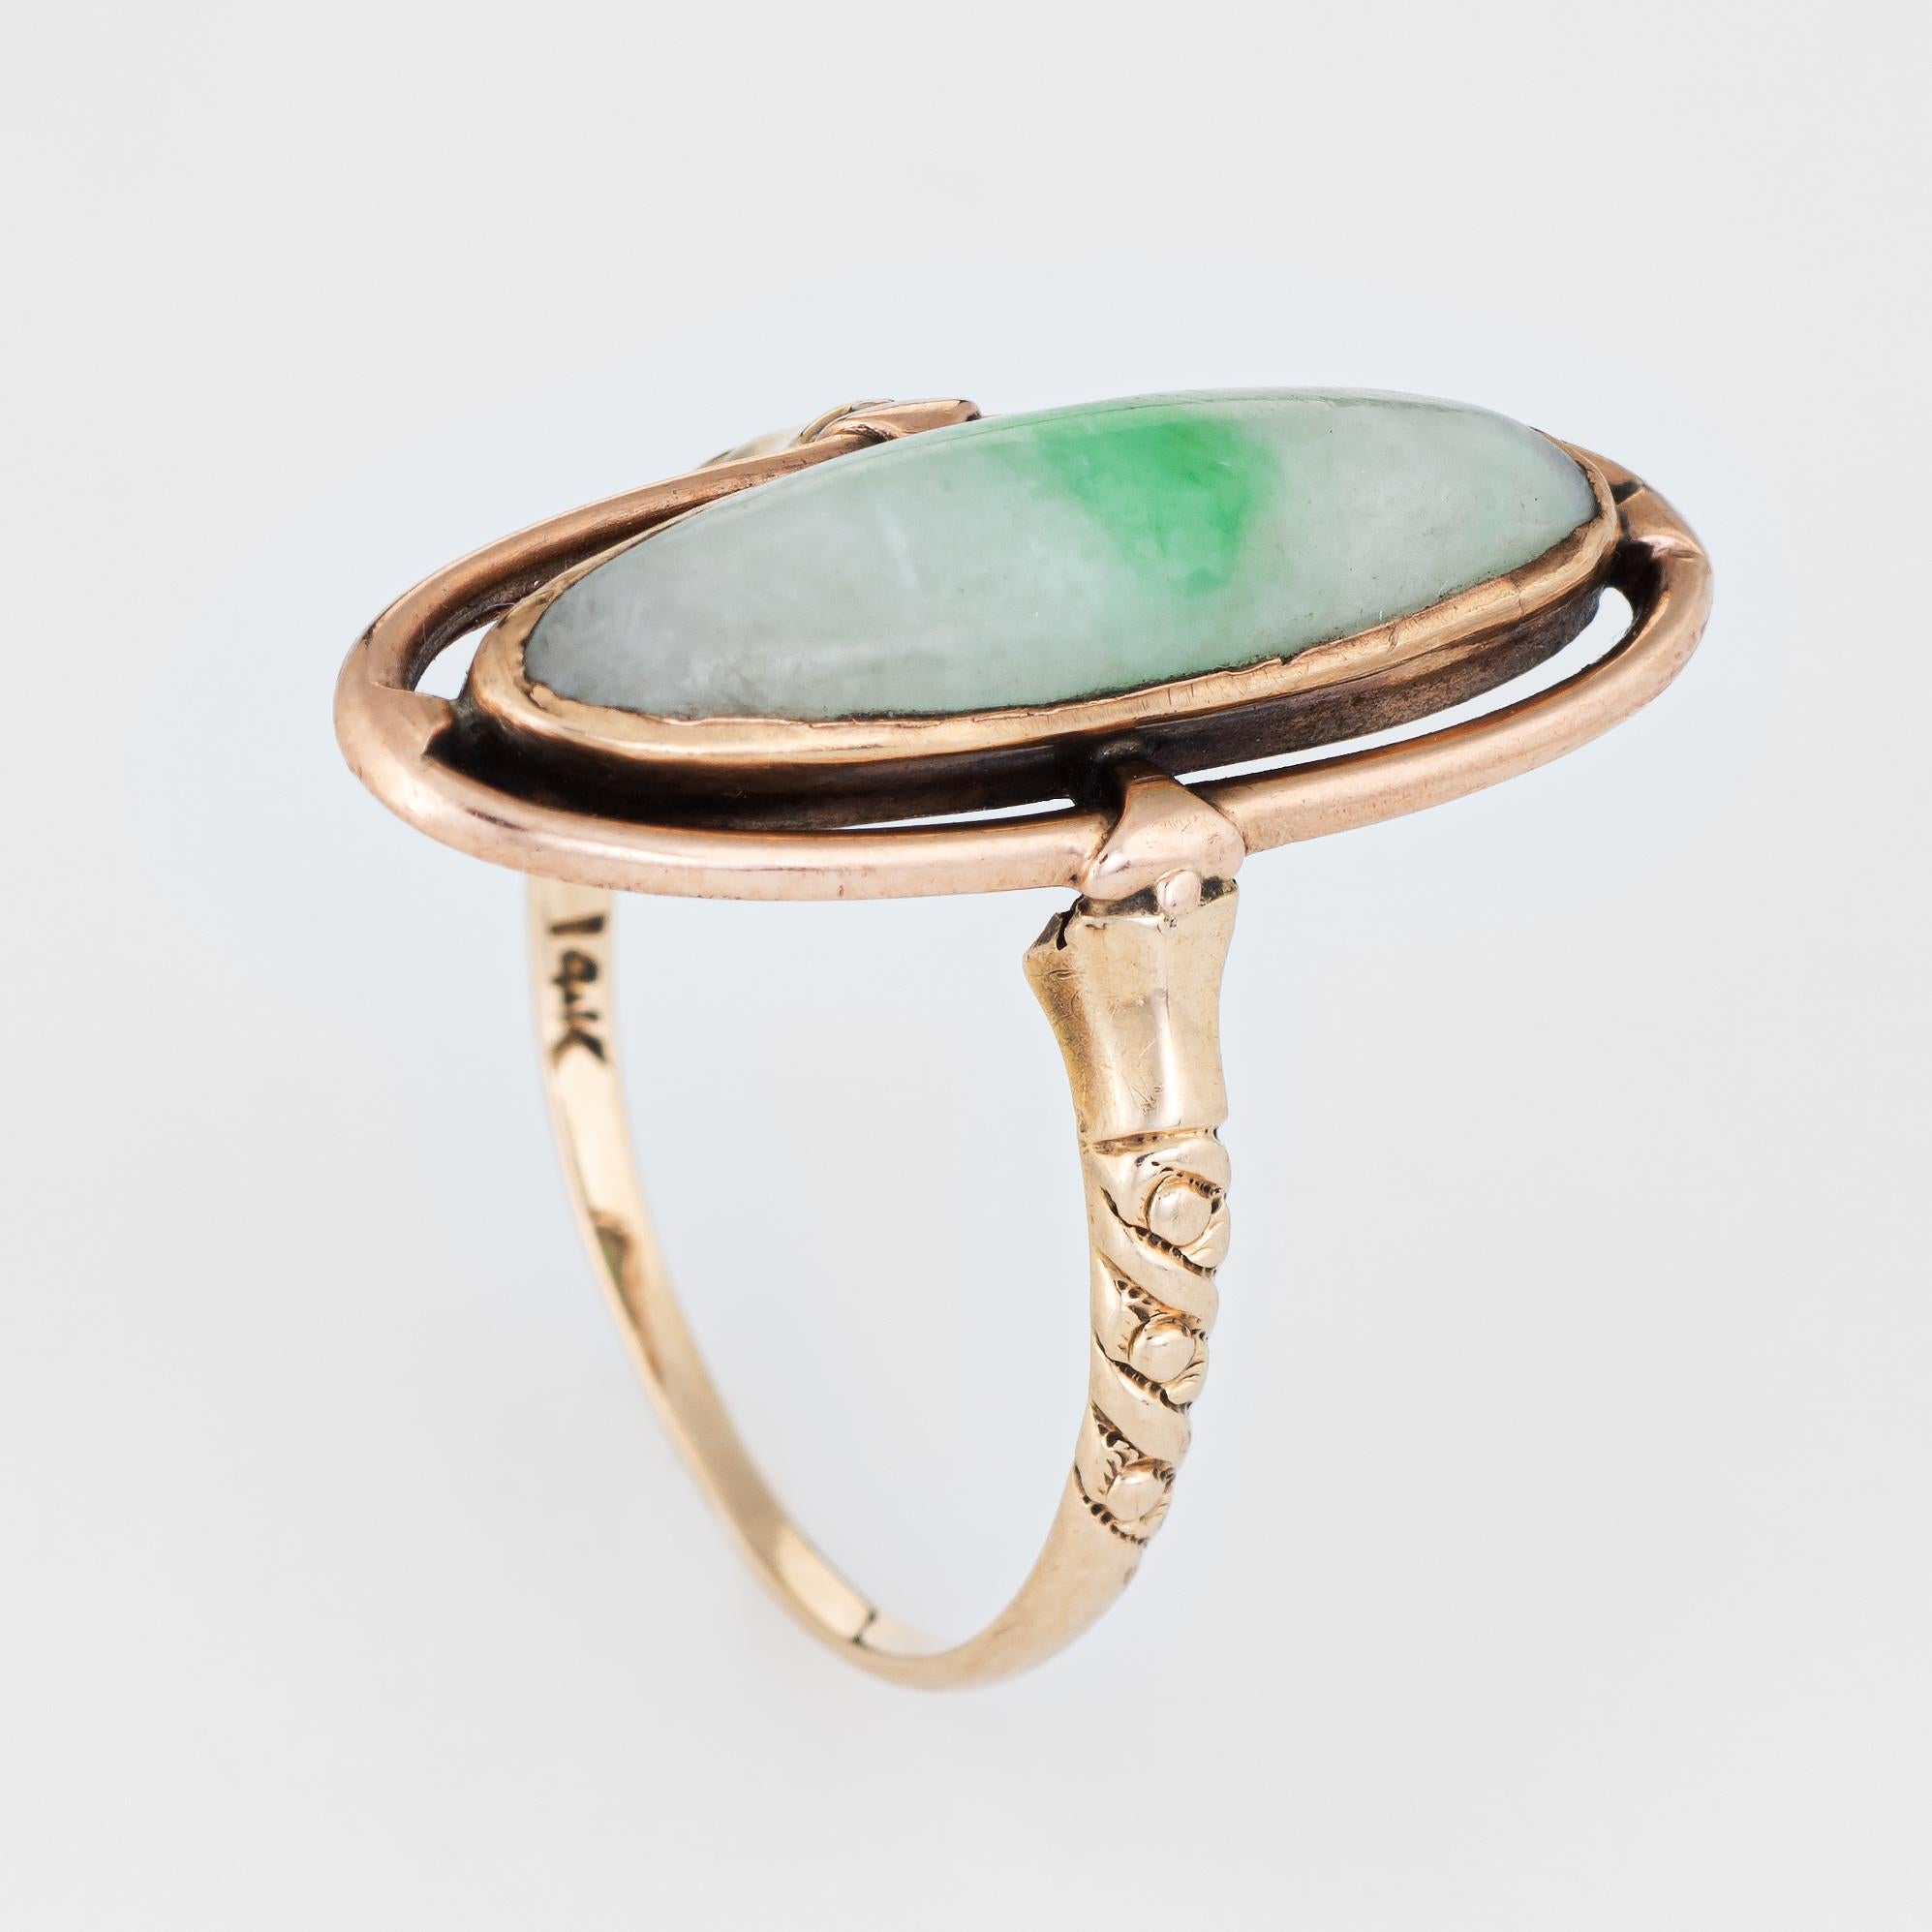 Finely detailed vintage jade ring (circa 1940s to 1950s), crafted in 14 karat yellow gold. 

Jade is cabochon cut measuring 20mm x 6mm (estimated at 4.50 carats). The jade is in excellent condition and free of cracks or chips. 

The stylish vintage